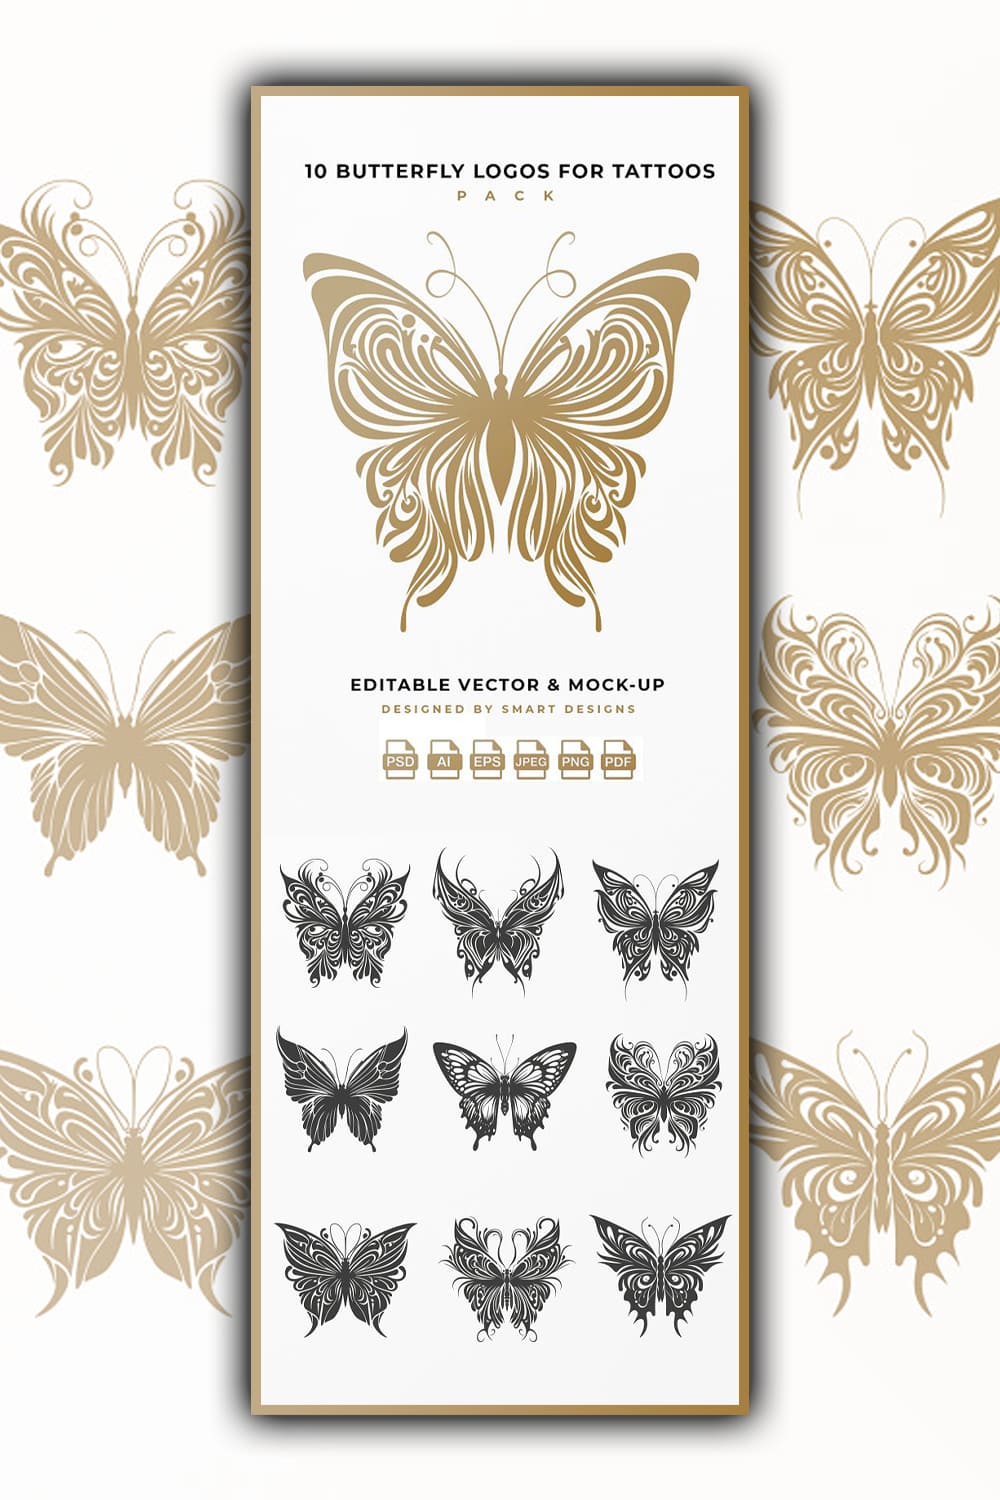 Butterflies are drawn with wavy lines in beige and black.